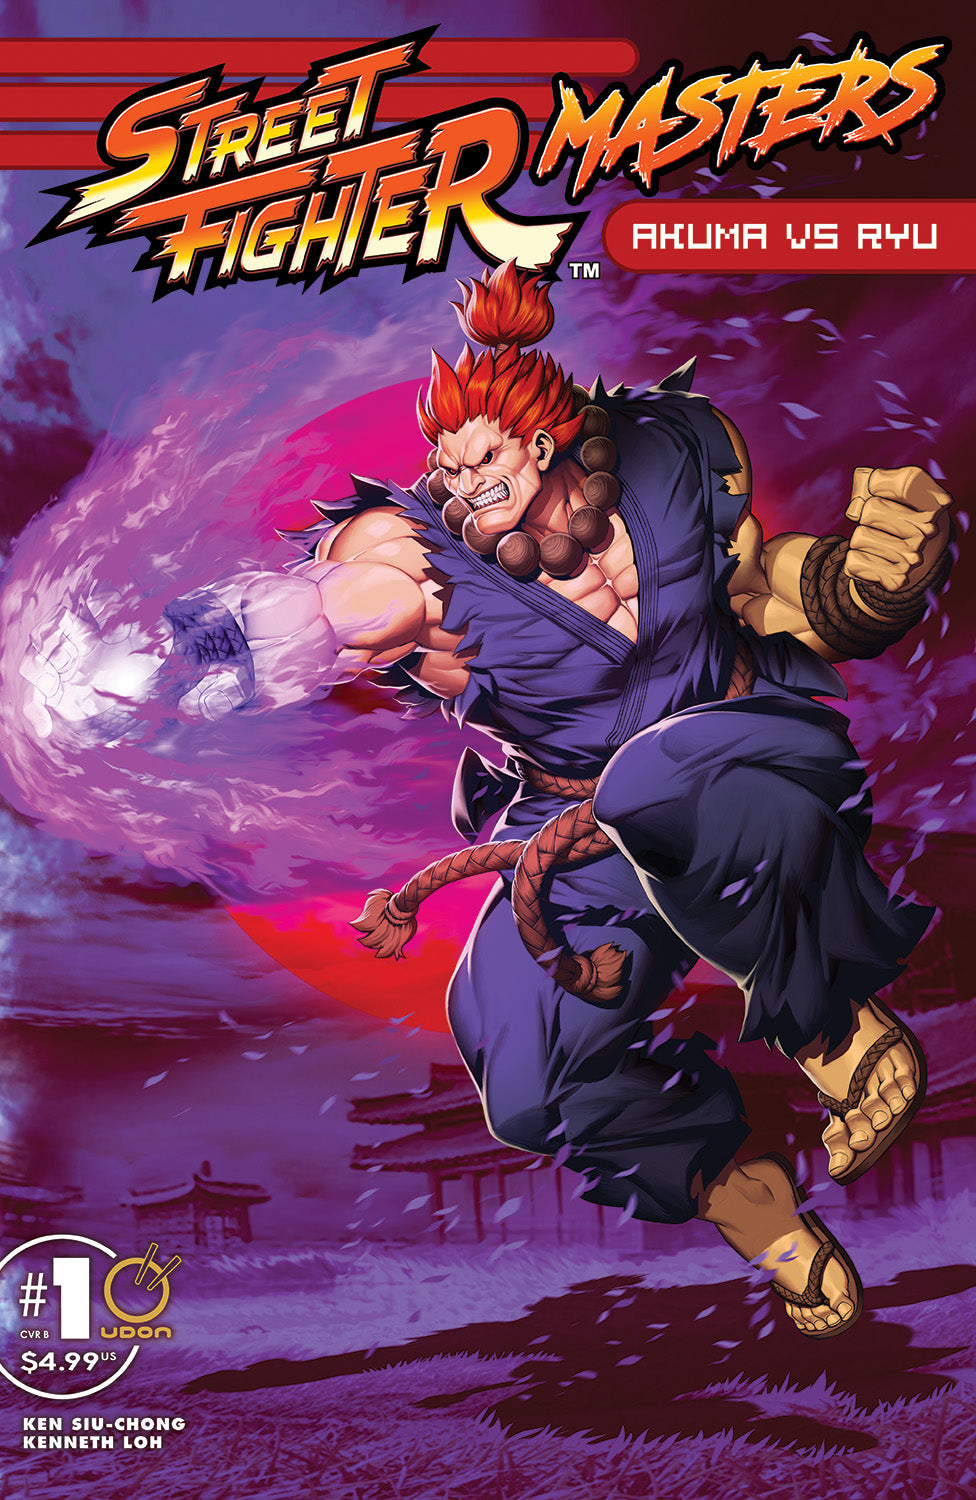 Cre.O.N 👽クレオン👽 on X: AKUMA!!! *Detail from my X-MEN vs Street fighter  Collector Print available for sale on THE STORE (link in my bio). #akuma # gouki #streetfighter #xmenvsstreetfighter  / X